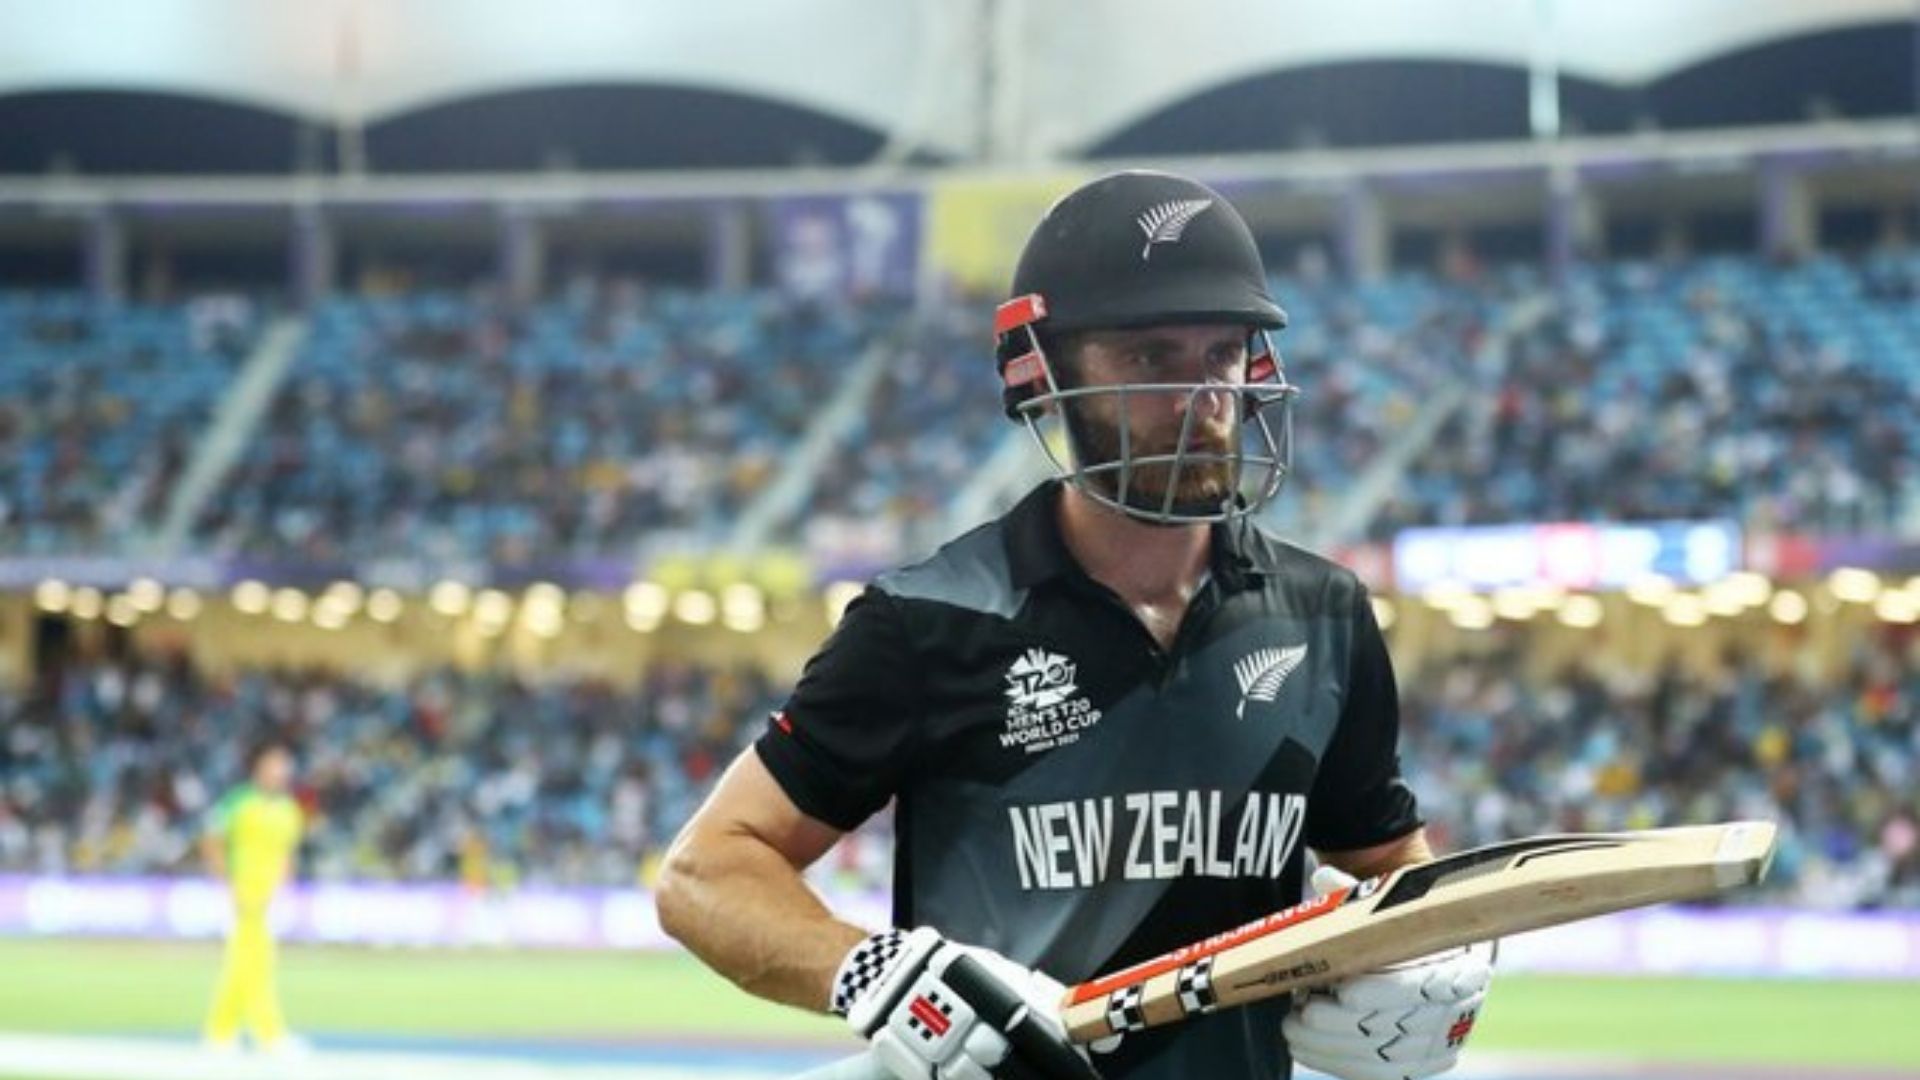 No Kane Williamson for New Zealand's T20I series against India